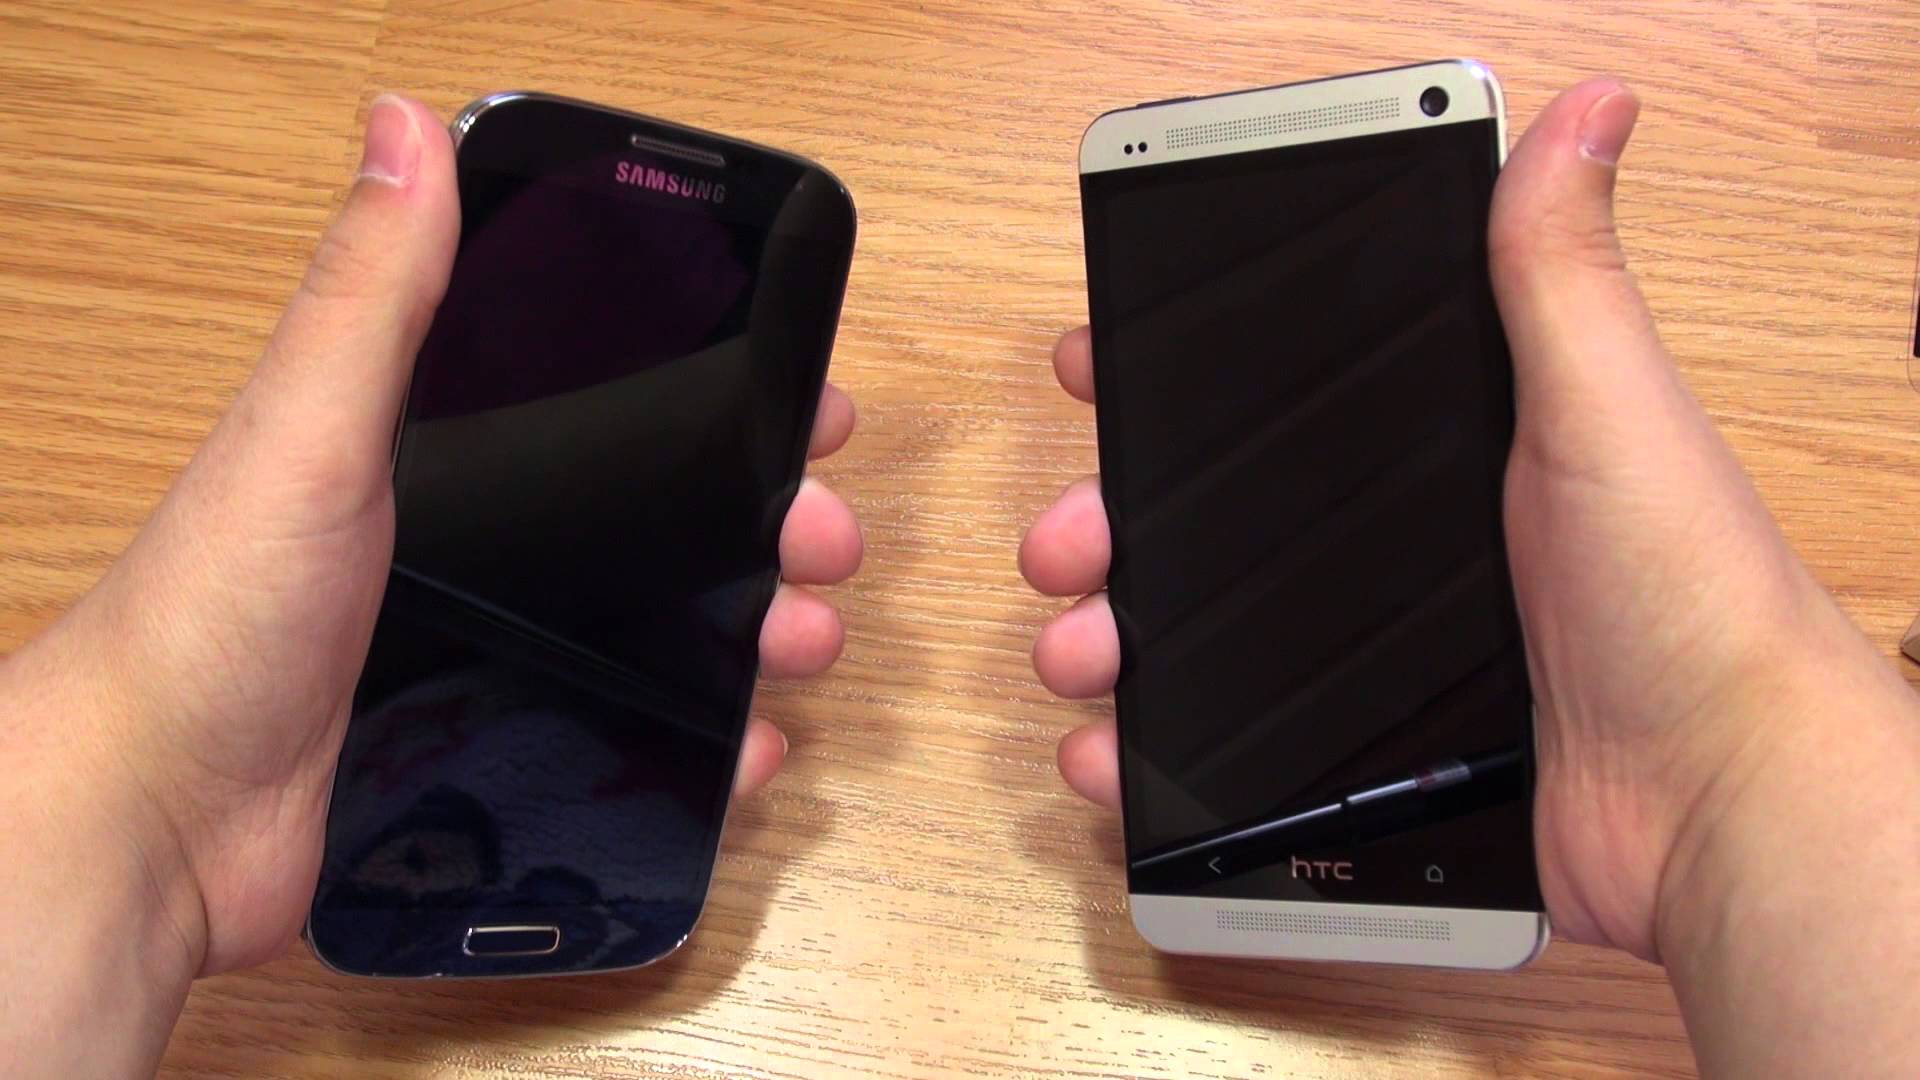 Galaxy S4: Unboxing, HTC One Comparison, Screen Quality